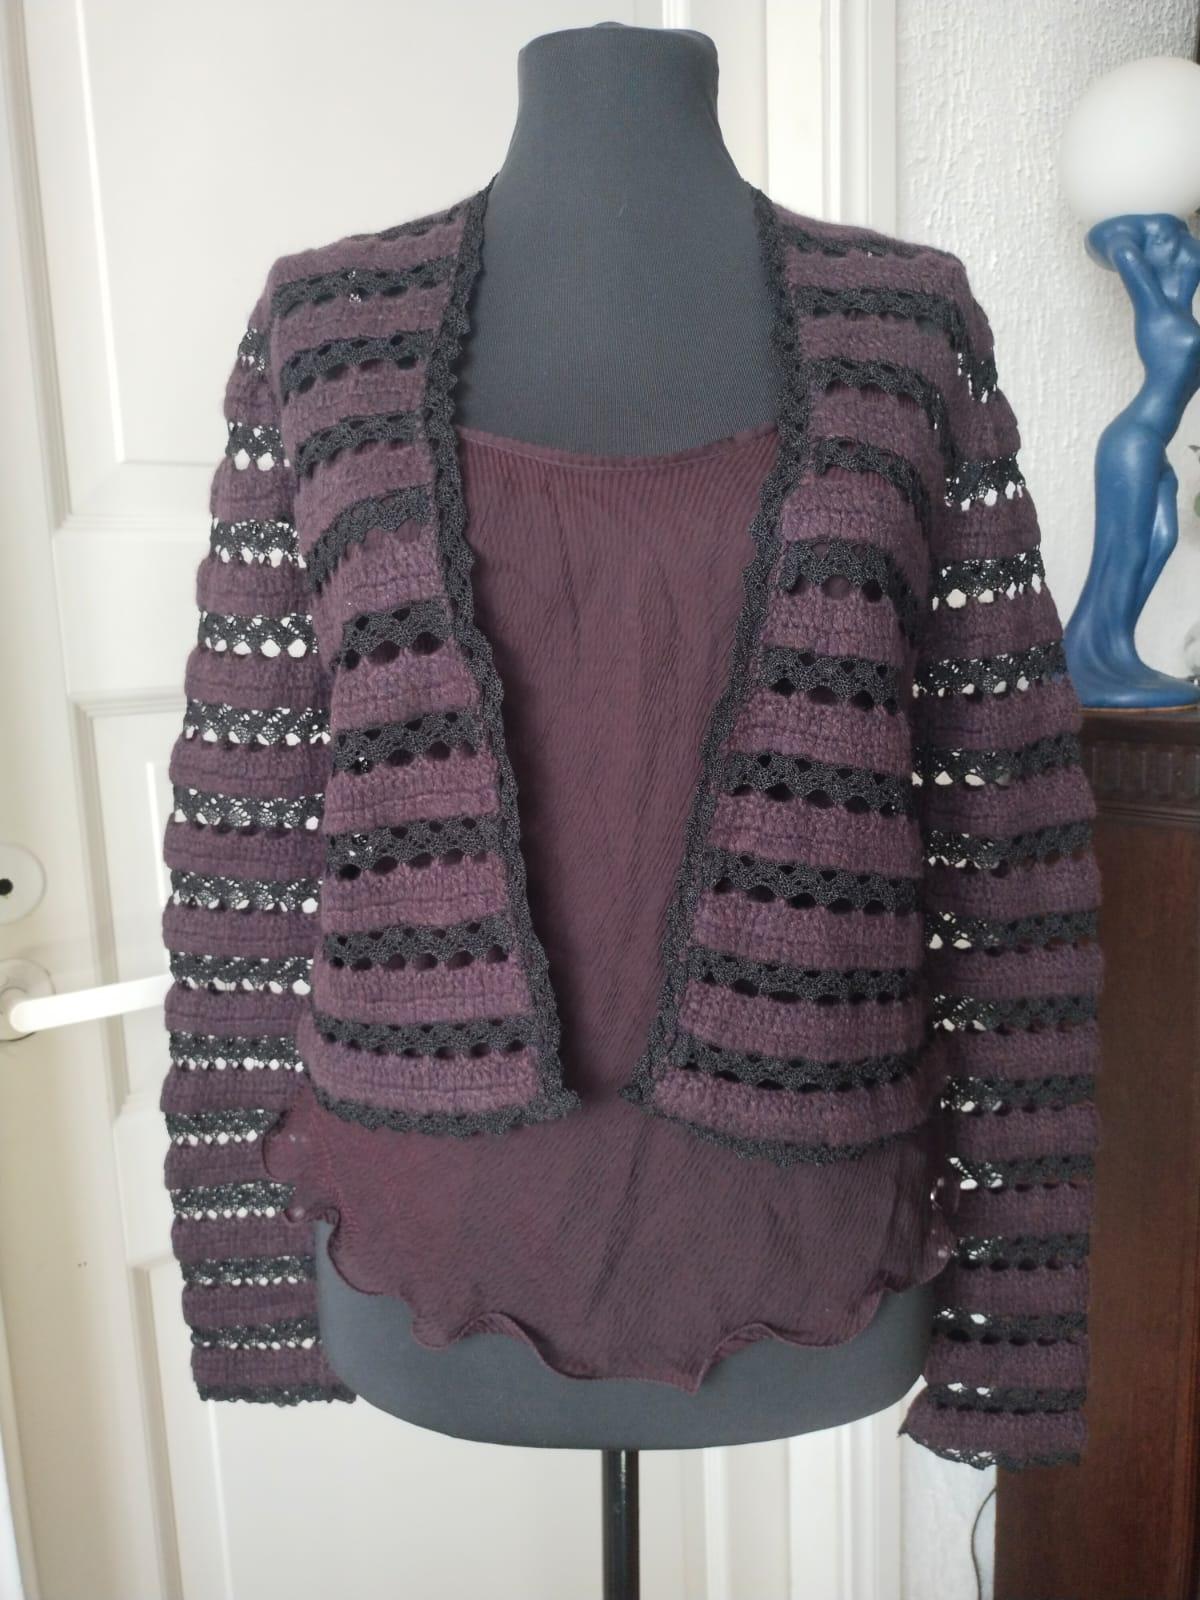 CHANEL 02A 2002-2003 Fall RTW cardigan / top Karl Lagerfeld  For Sale 16